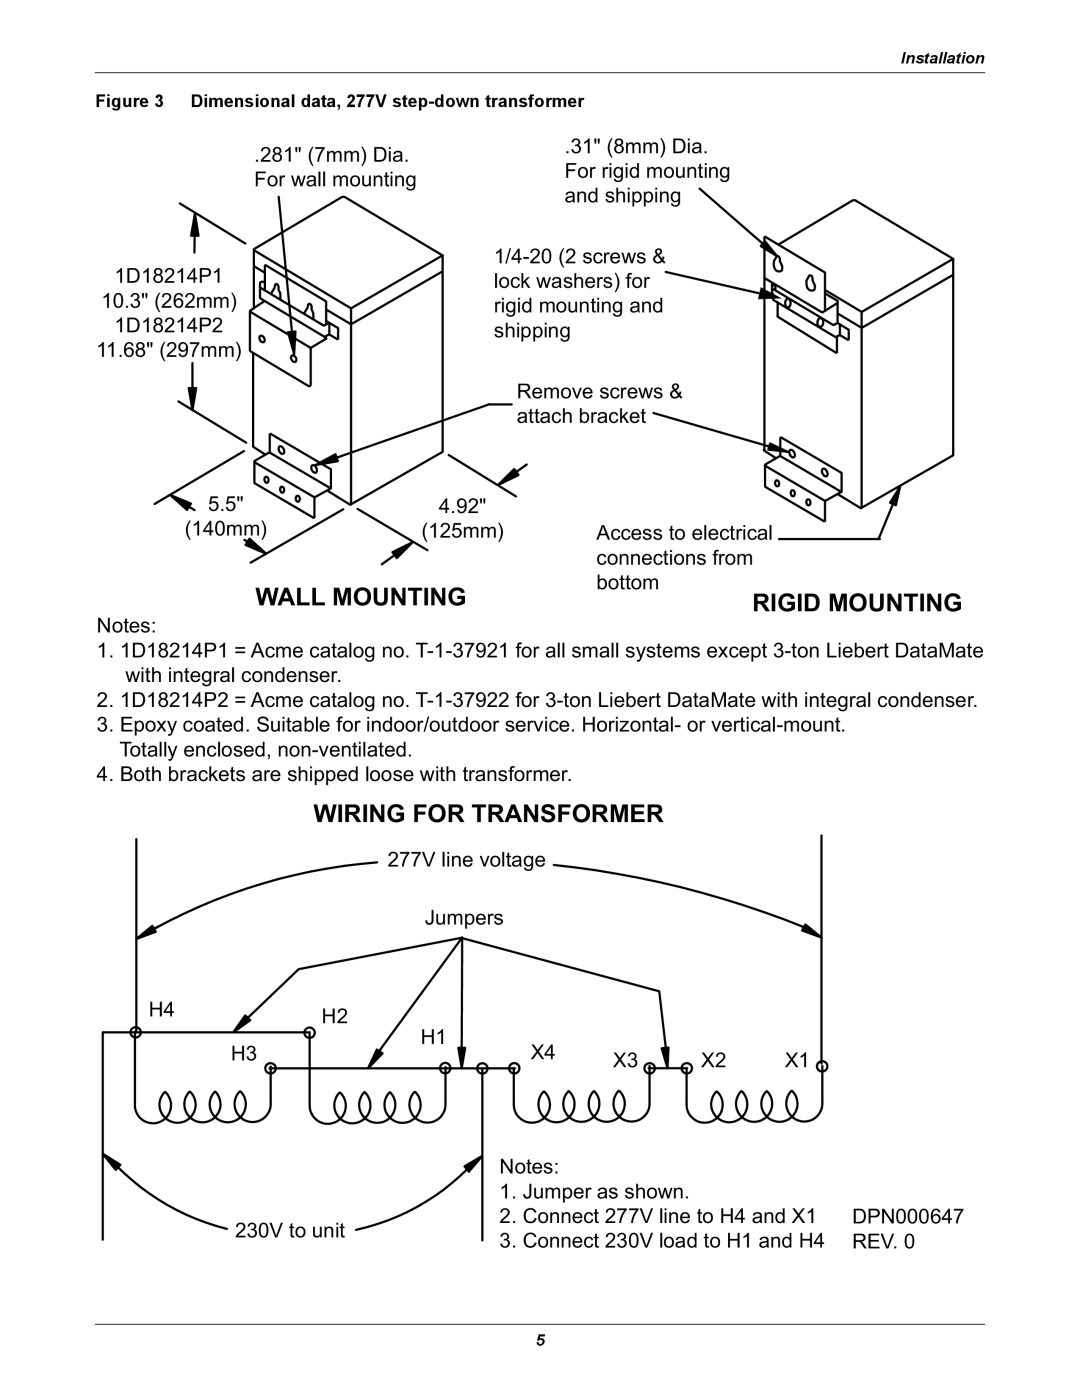 Emerson Figure i manual Wall Mounting, Wiring For Transformer, Rigid Mounting 